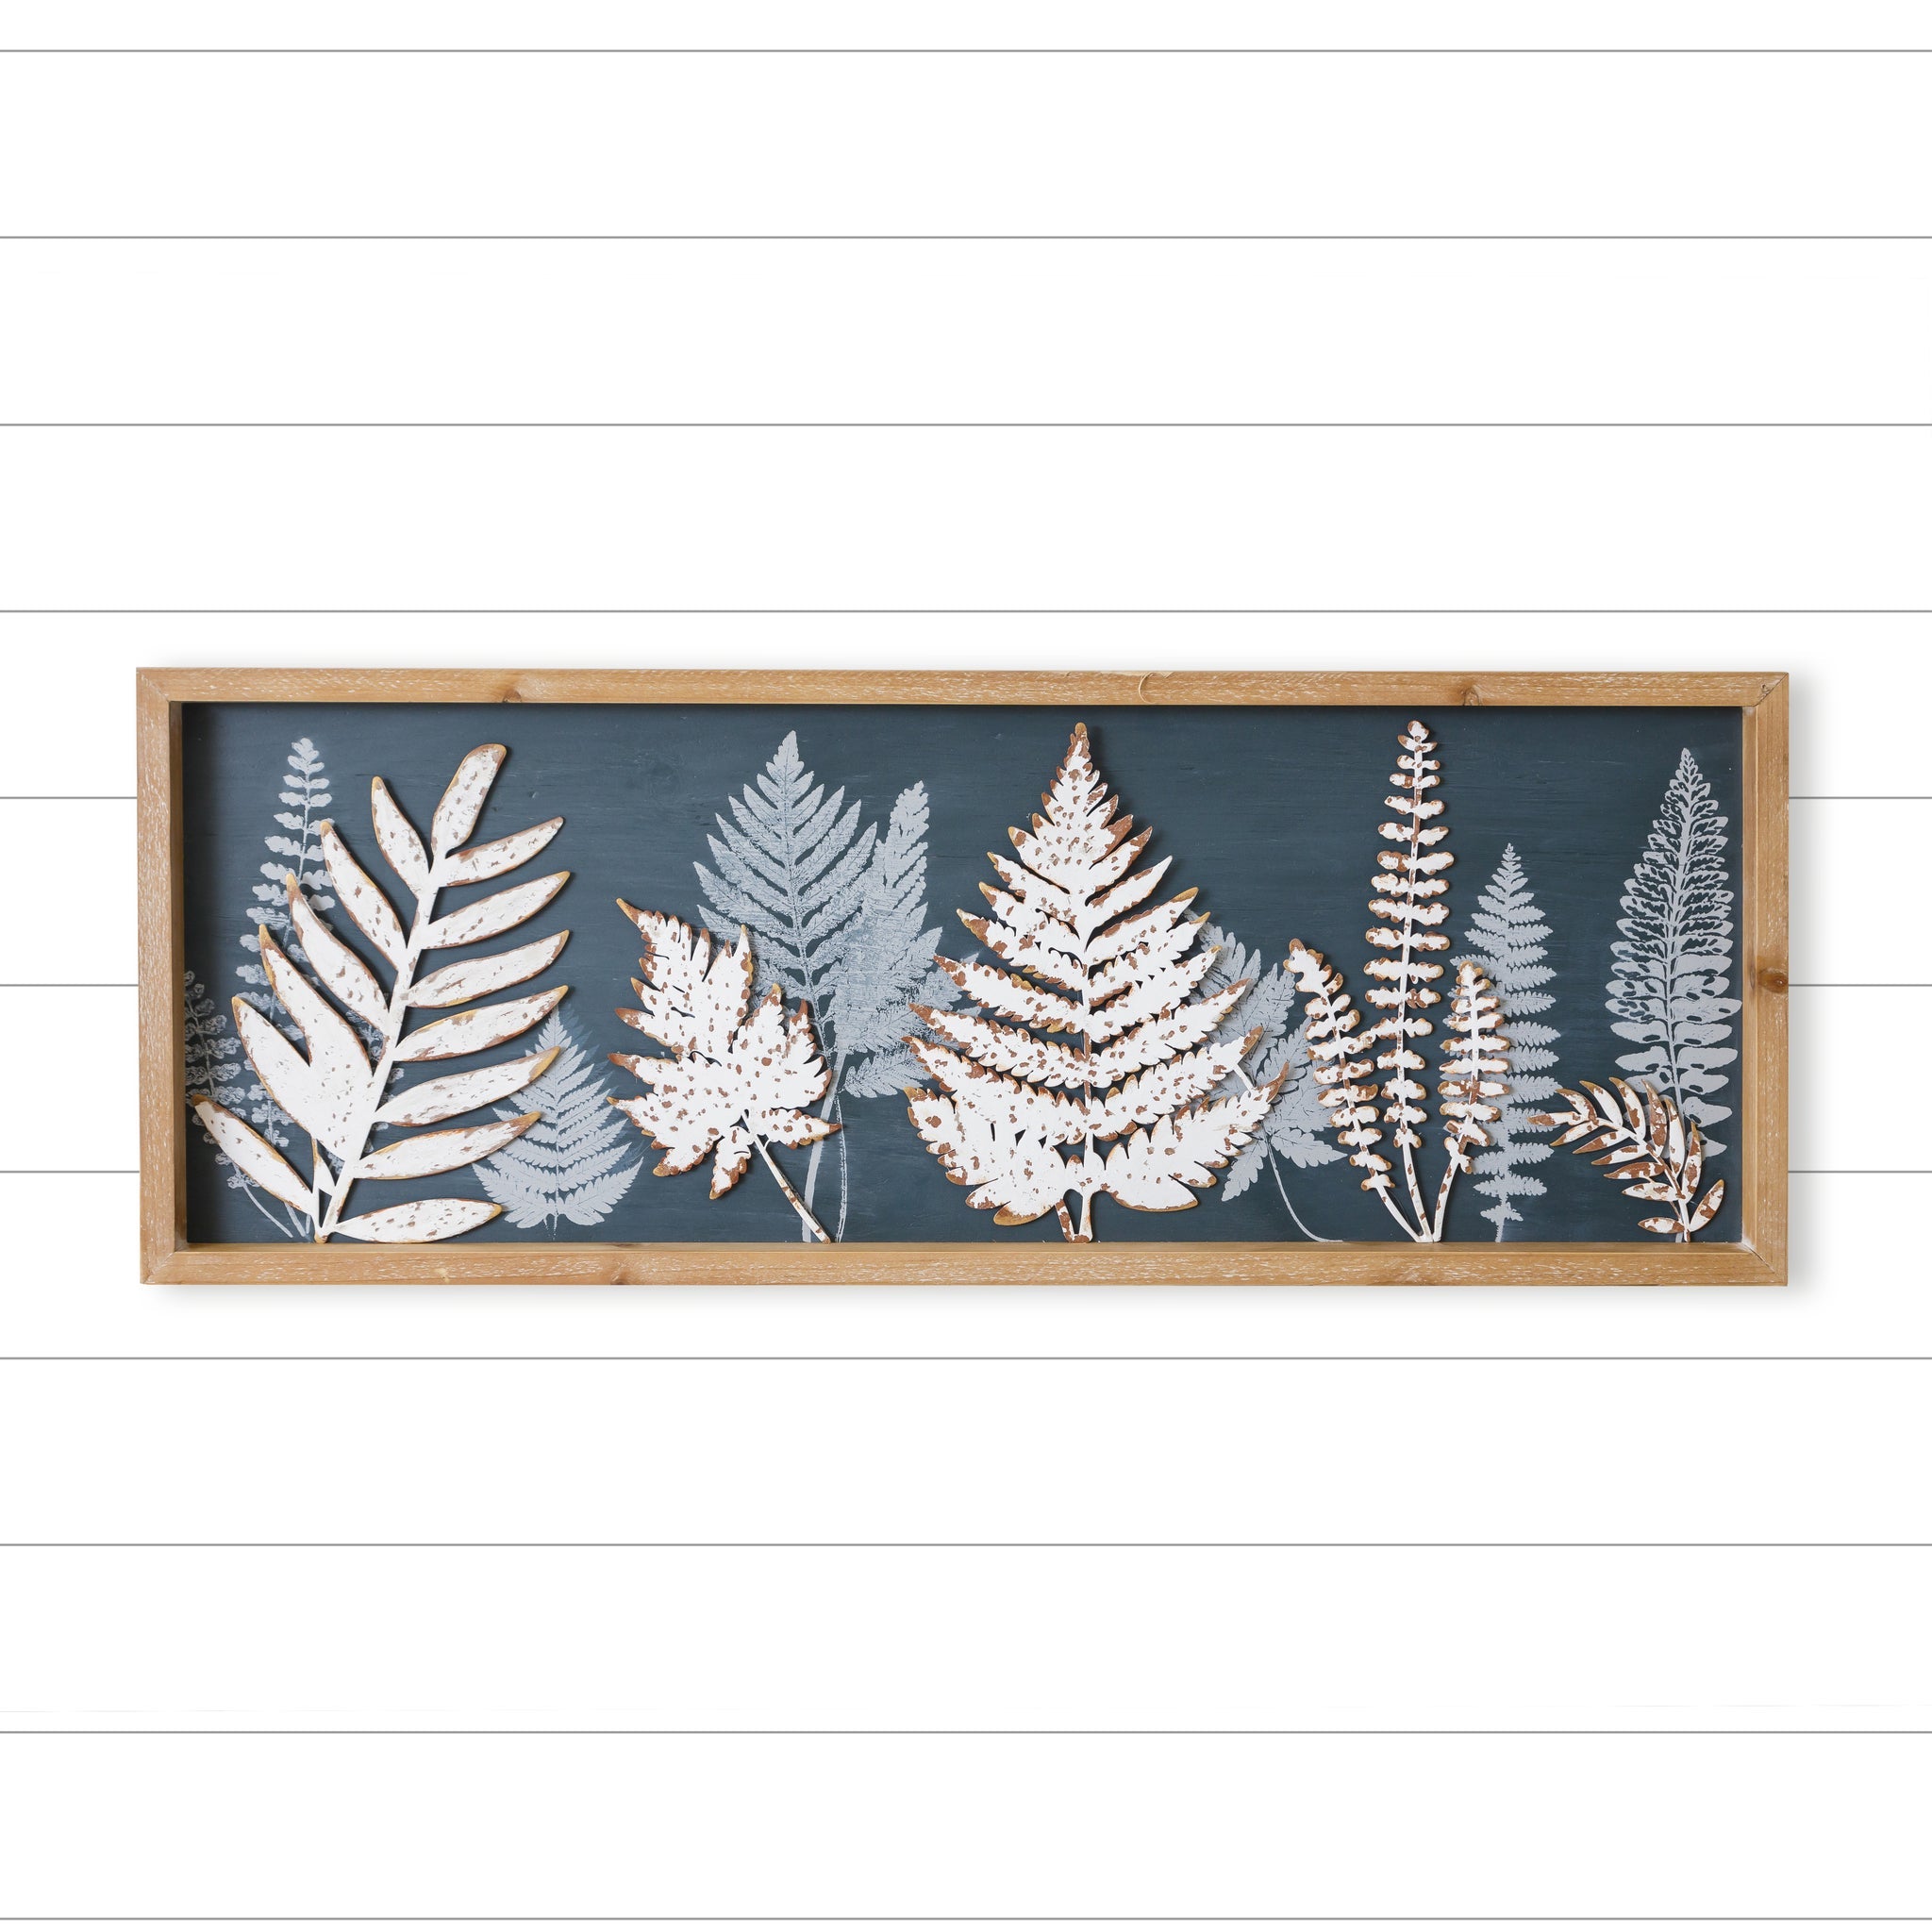 Wall Hanging - 3D Metal and Wood Ferns, Blue